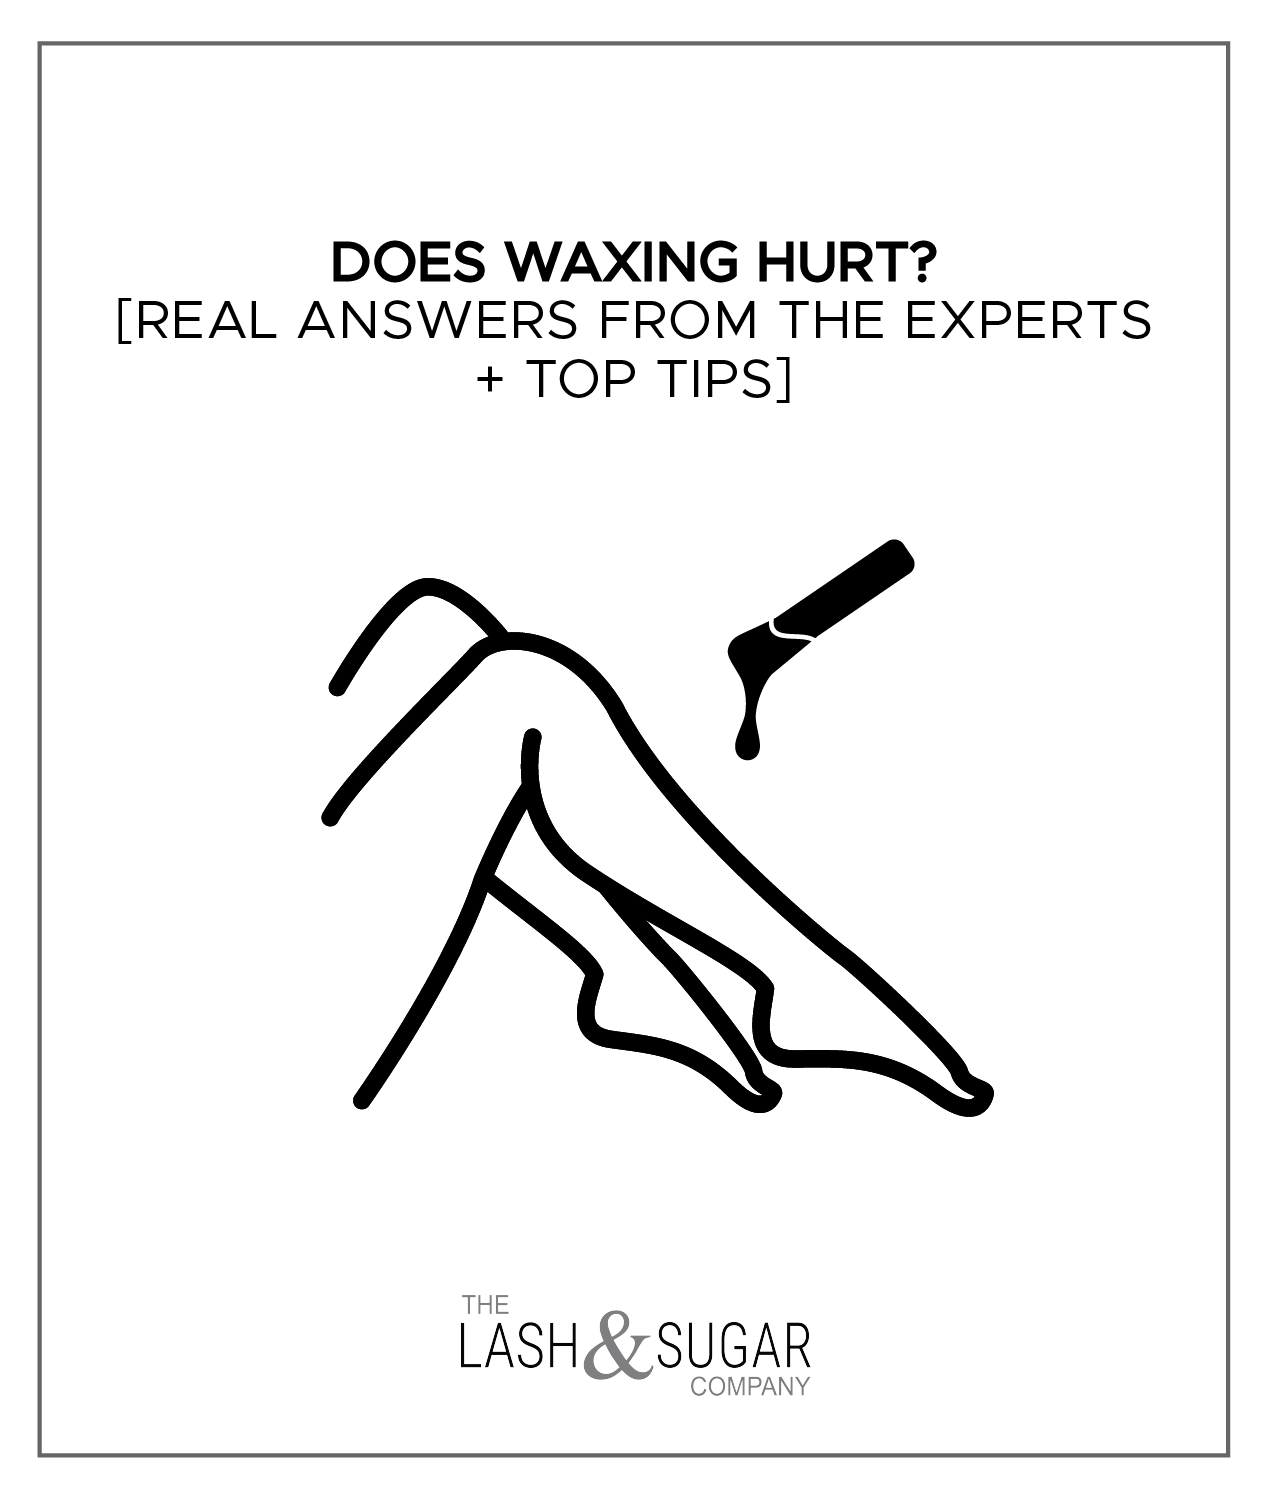 Waxing Pain Levels: Body Parts Ranked